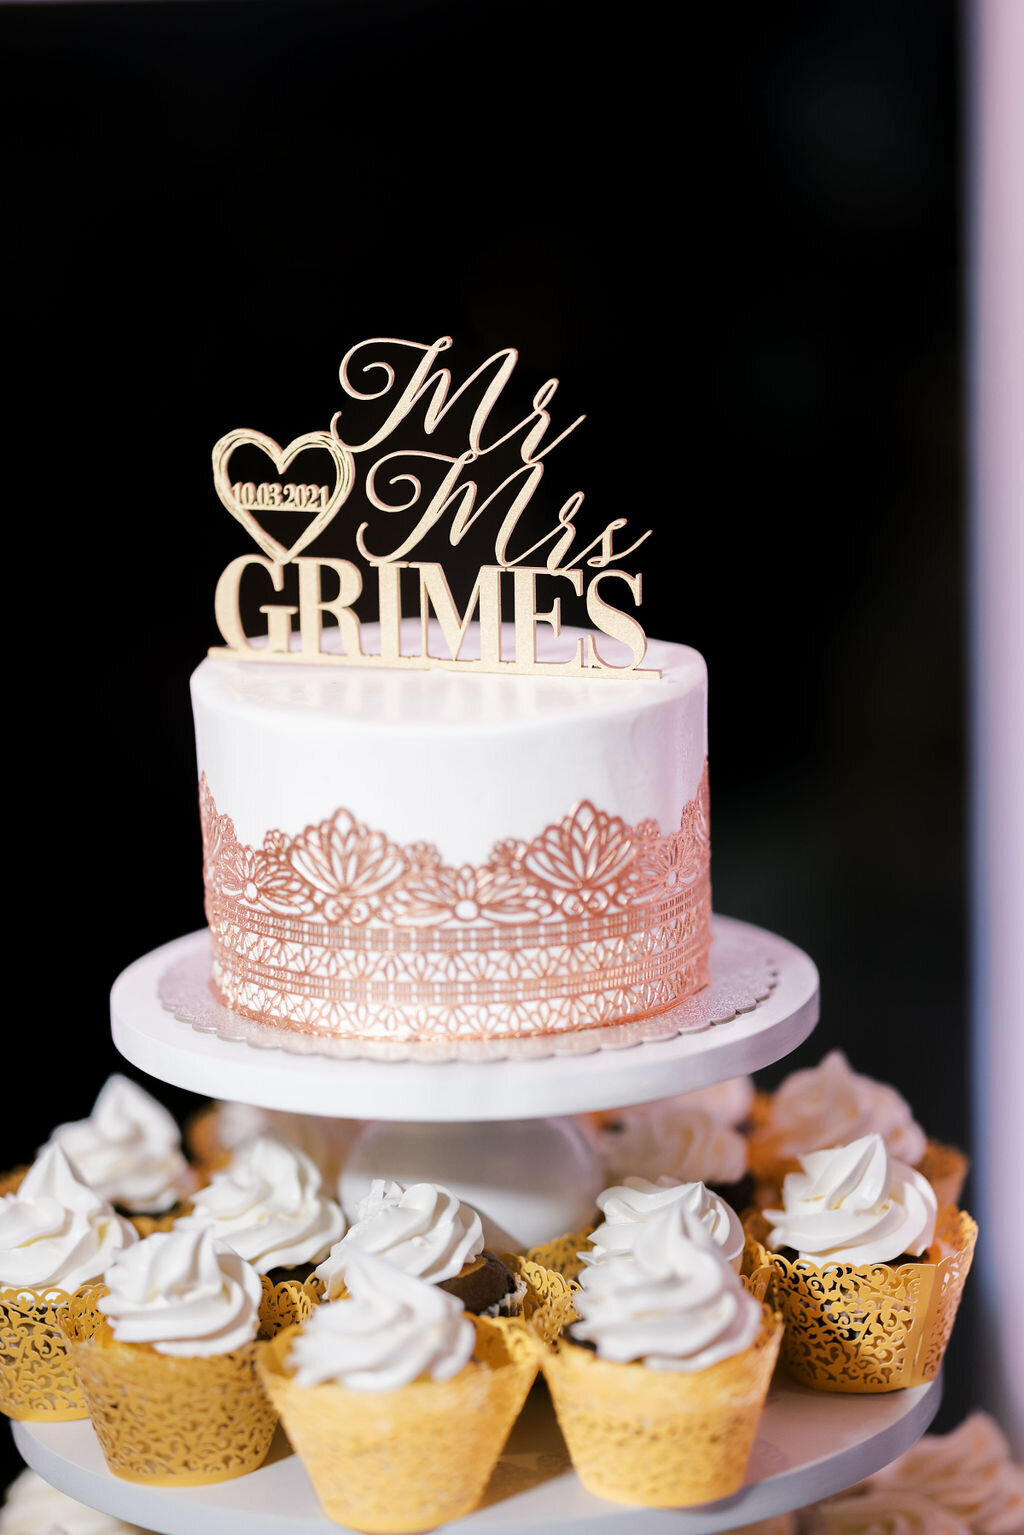 a white wedding cake decorated with an elegant pattern surrounded by cupcakes with gold liners and white frosting